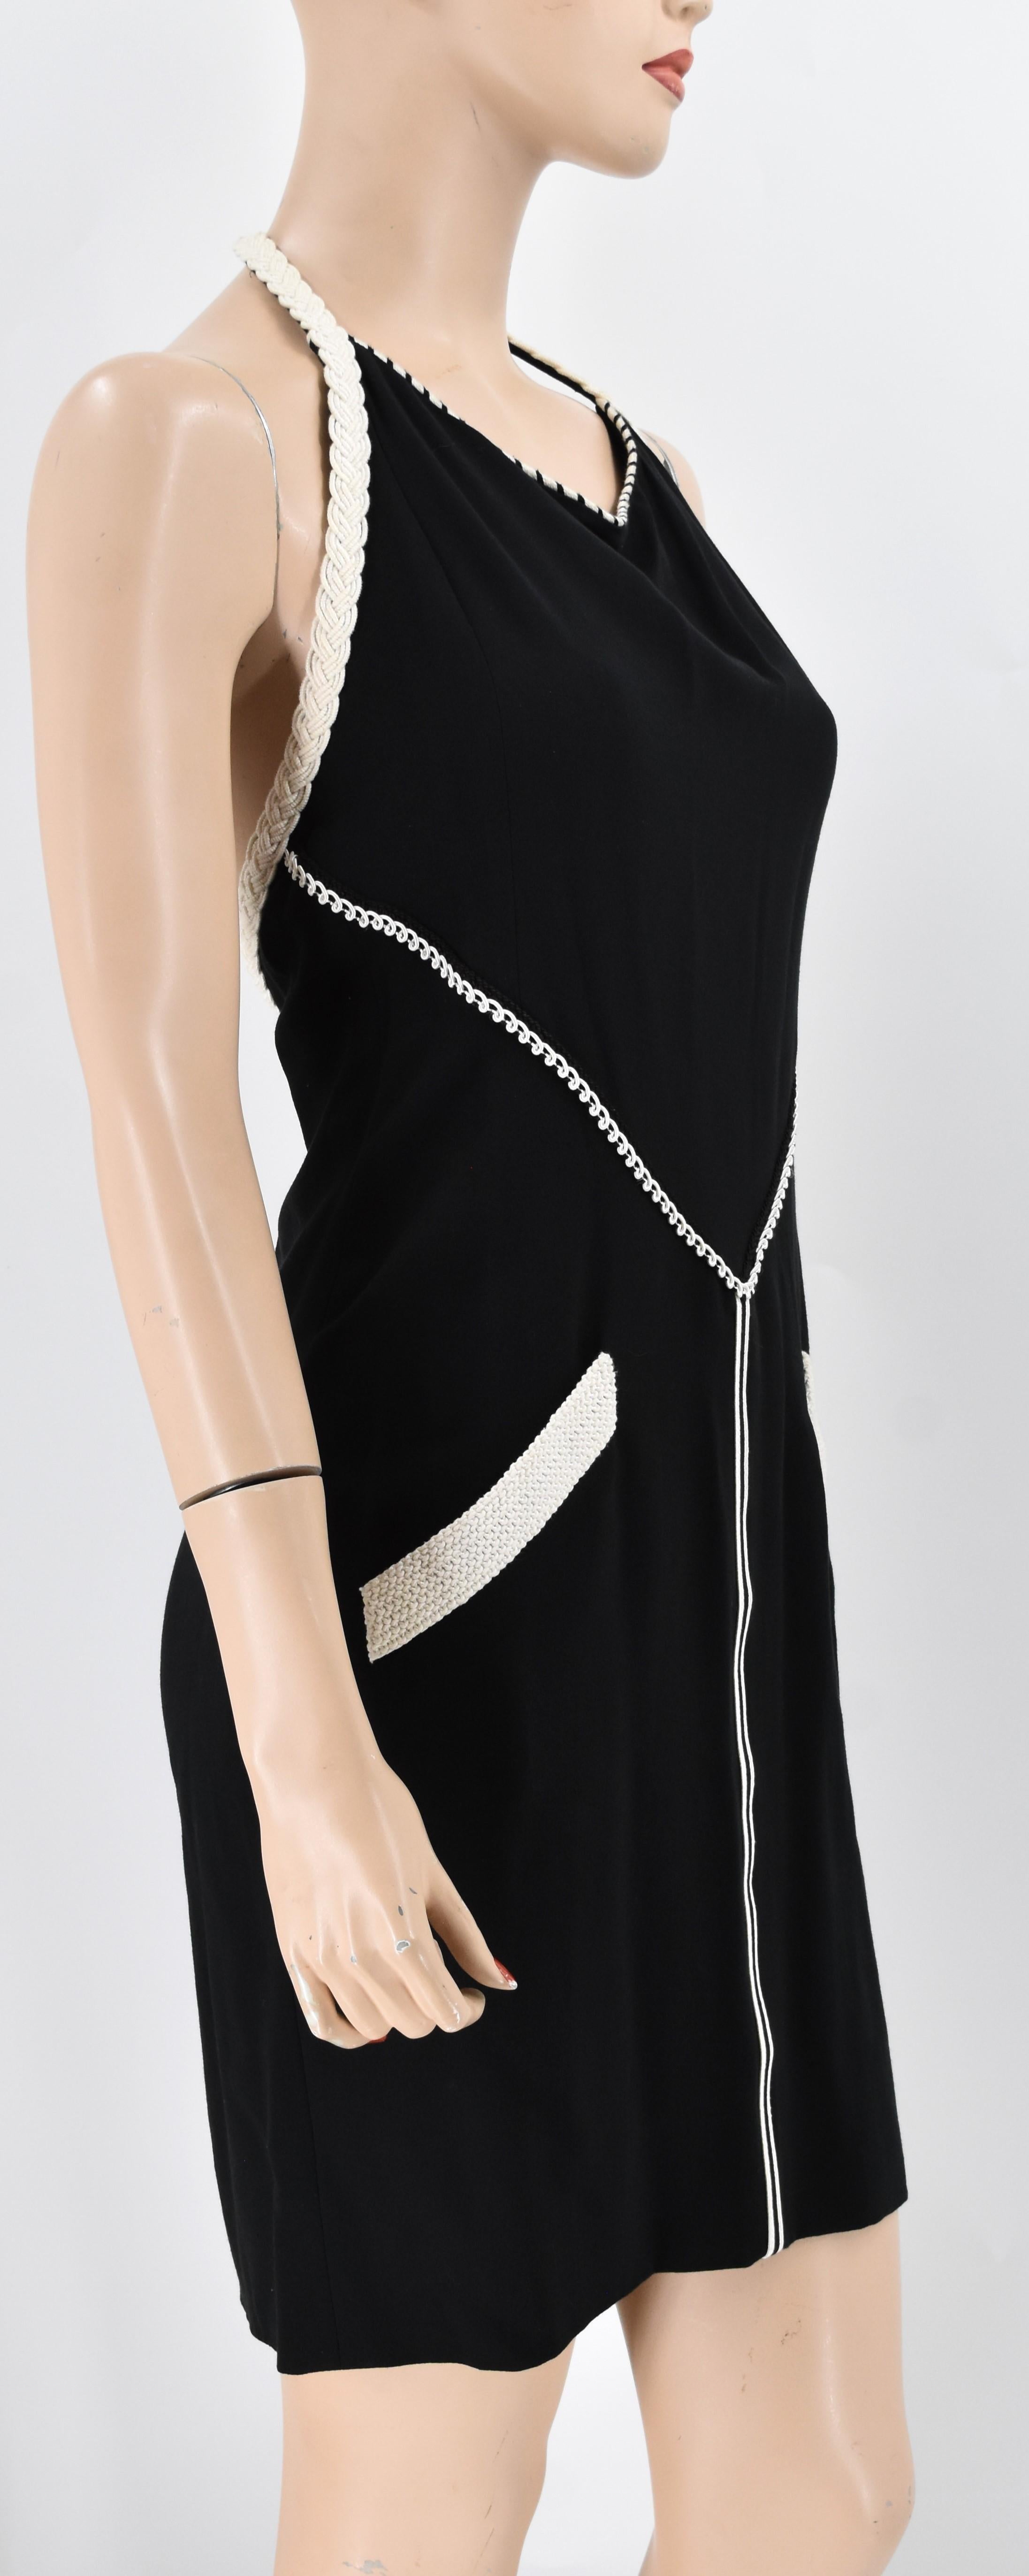 Chanel Boutique vintage halter dress adorned with braided trim throughout. It is in excellent condition. Color is beautiful blend of black and white.